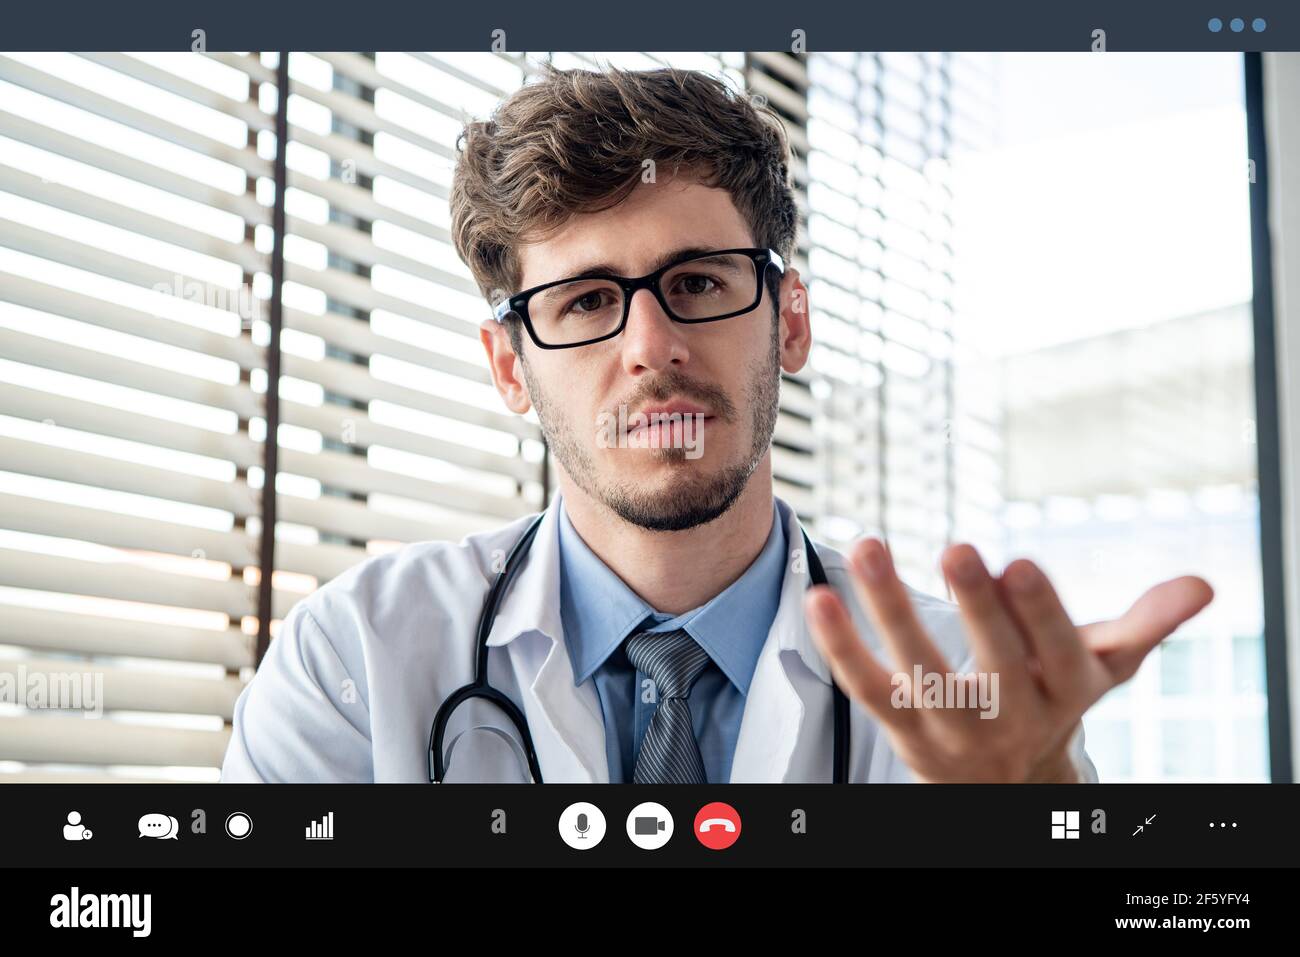 Young male doctor giving online medical consultation to patient via video calling application Stock Photo